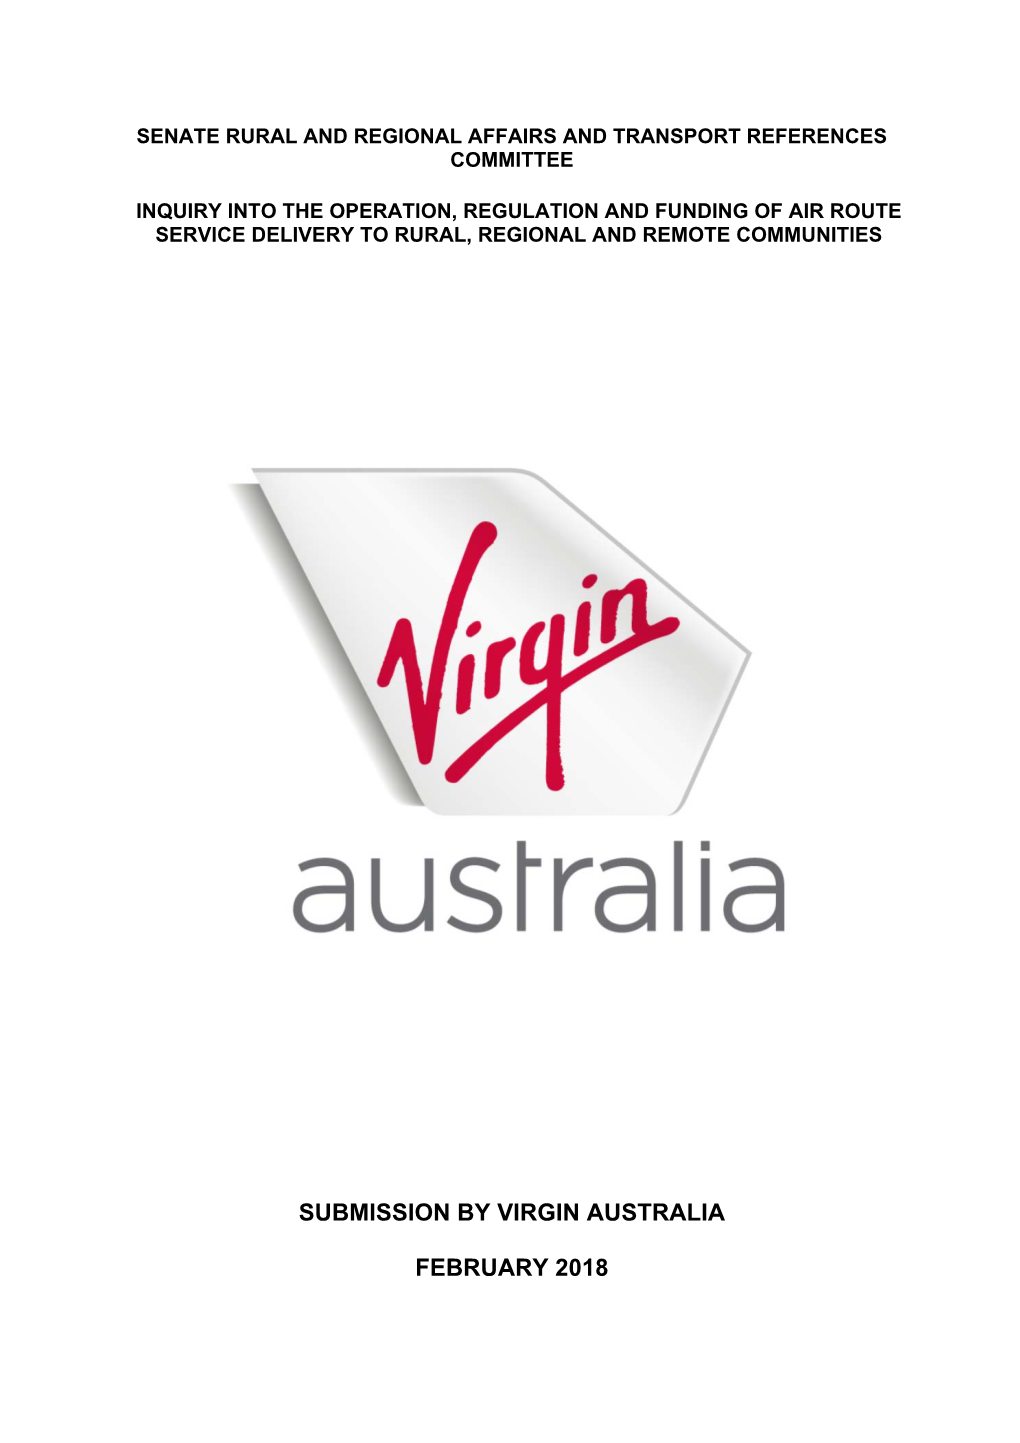 Submission by Virgin Australia February 2018